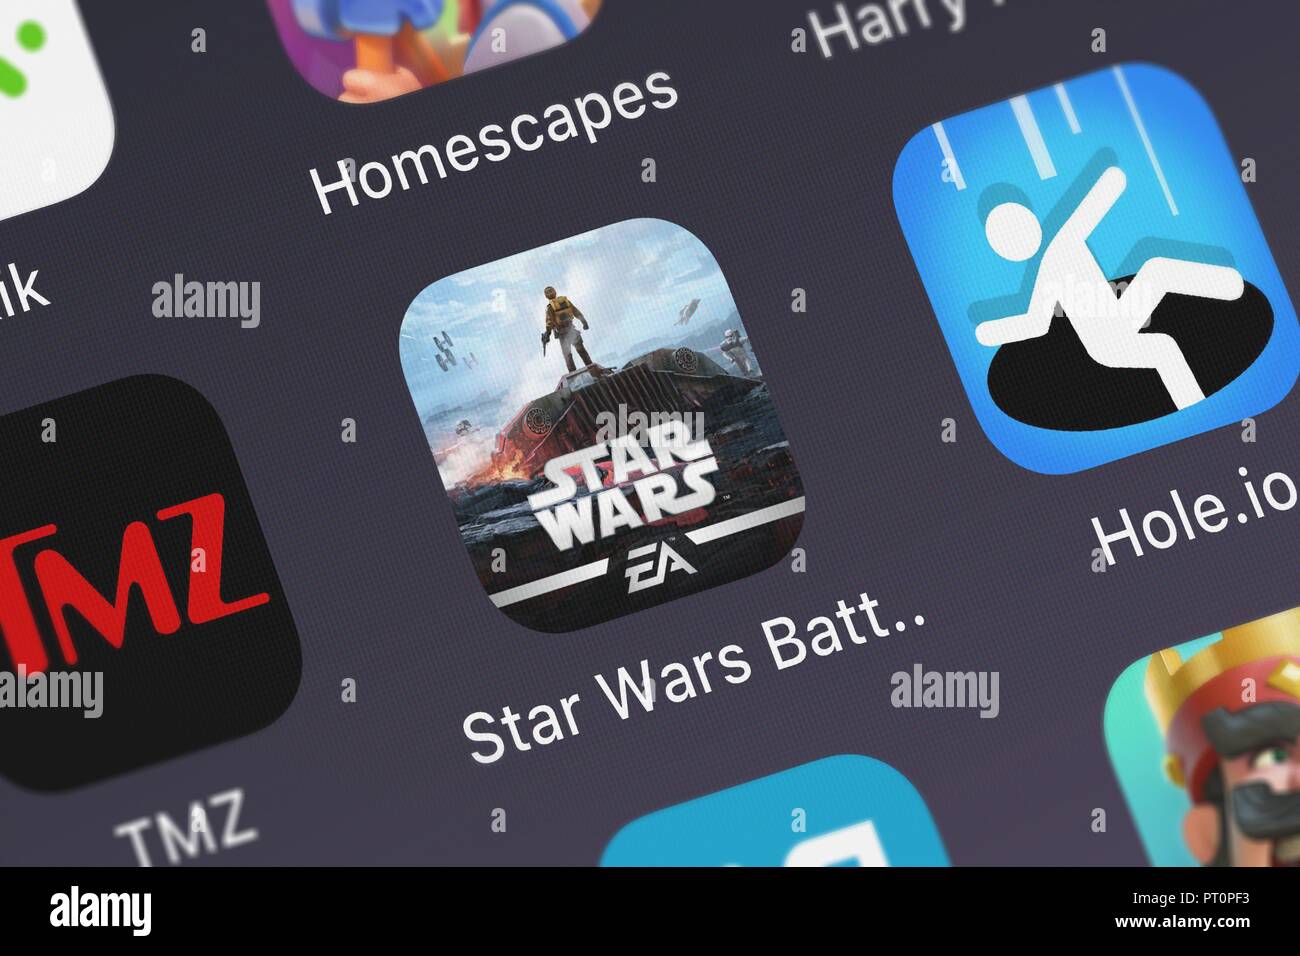 London, United Kingdom - October 05, 2018: Close-up shot of the Star Wars™ Battlefront™ Companion application icon from Electronic Arts on an iPhone. Stock Photo